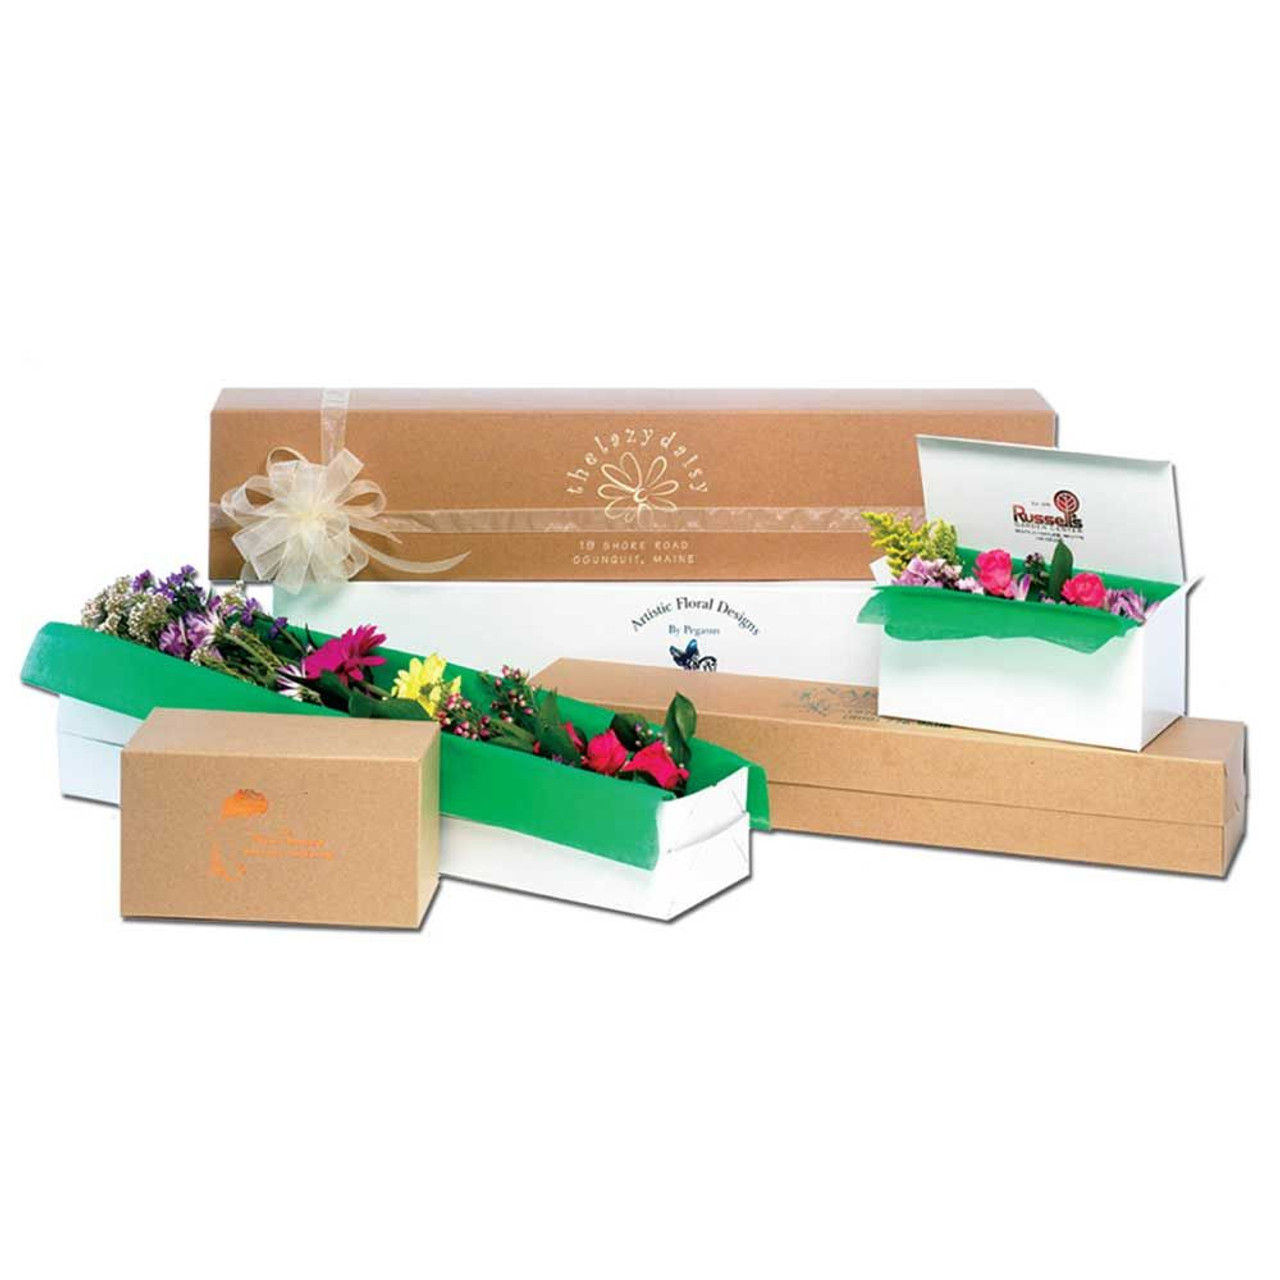 1 & 2 Piece Flower Boxes - Mid Atlantic Packaging